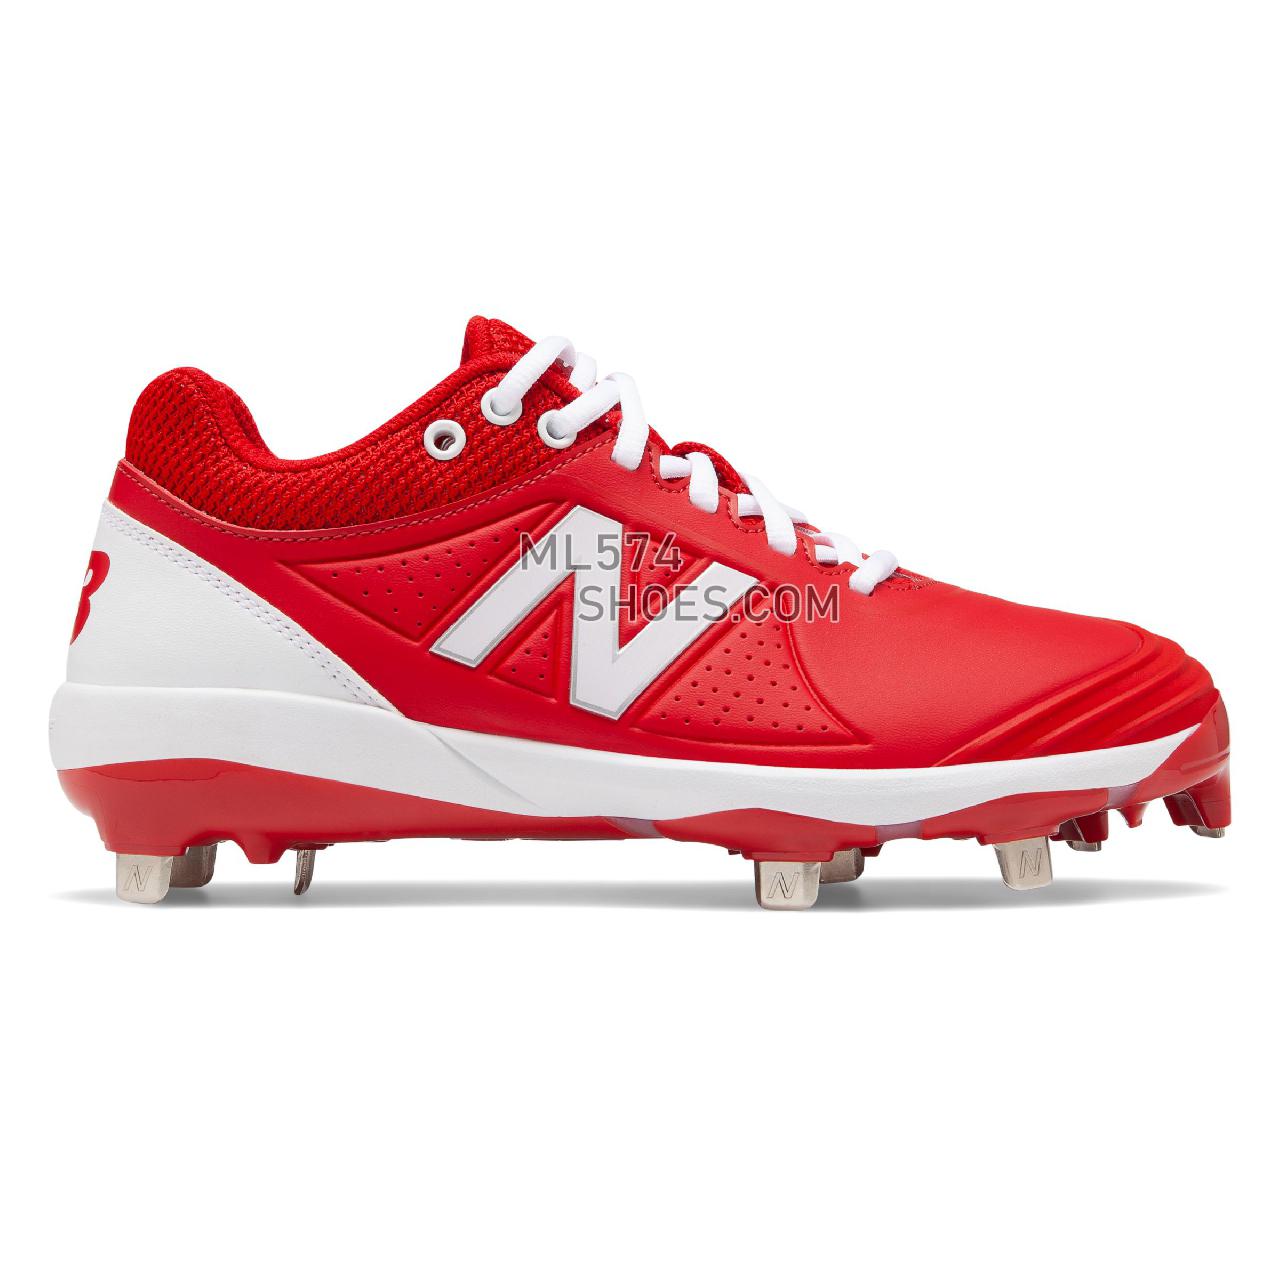 New Balance Fuse v2 Low Cut Metal - Women's Softball - Red with White - SMFUSER2